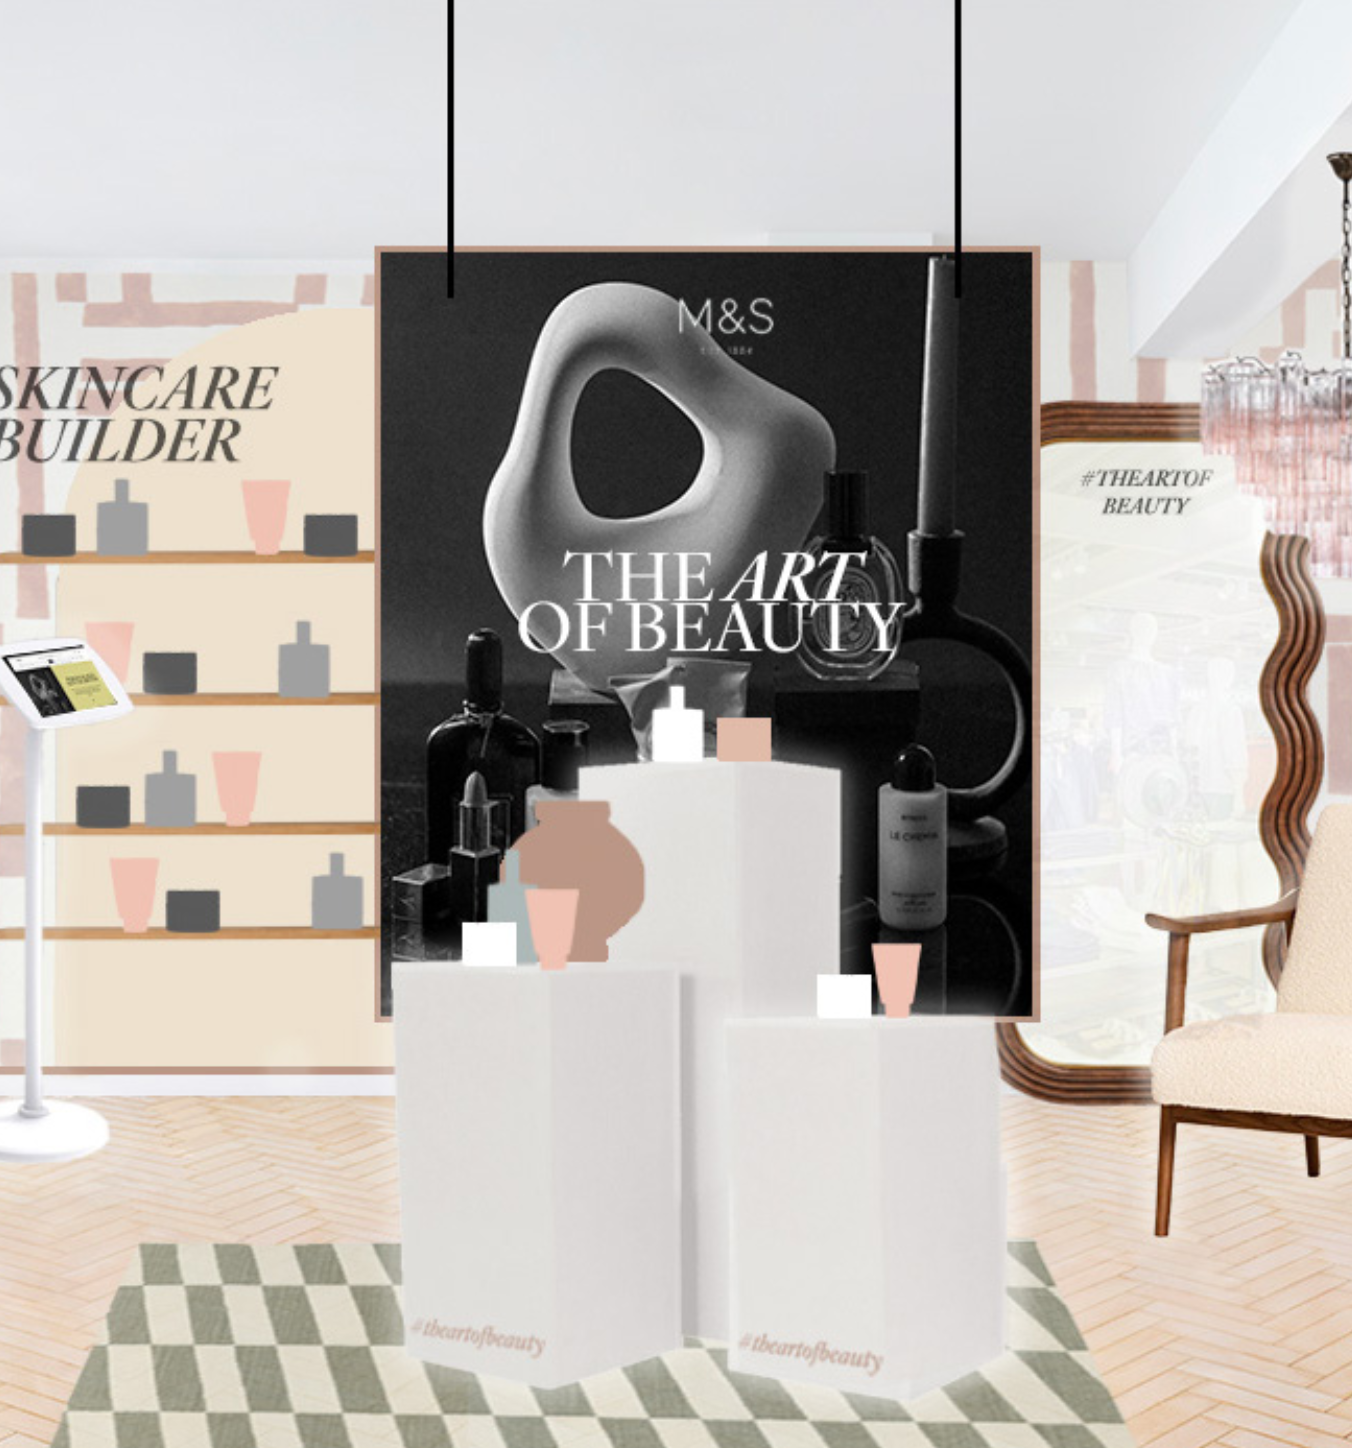 BA FCP work by Tara Lea. Image displays a bold interior design store mockup to entice younger audiences.